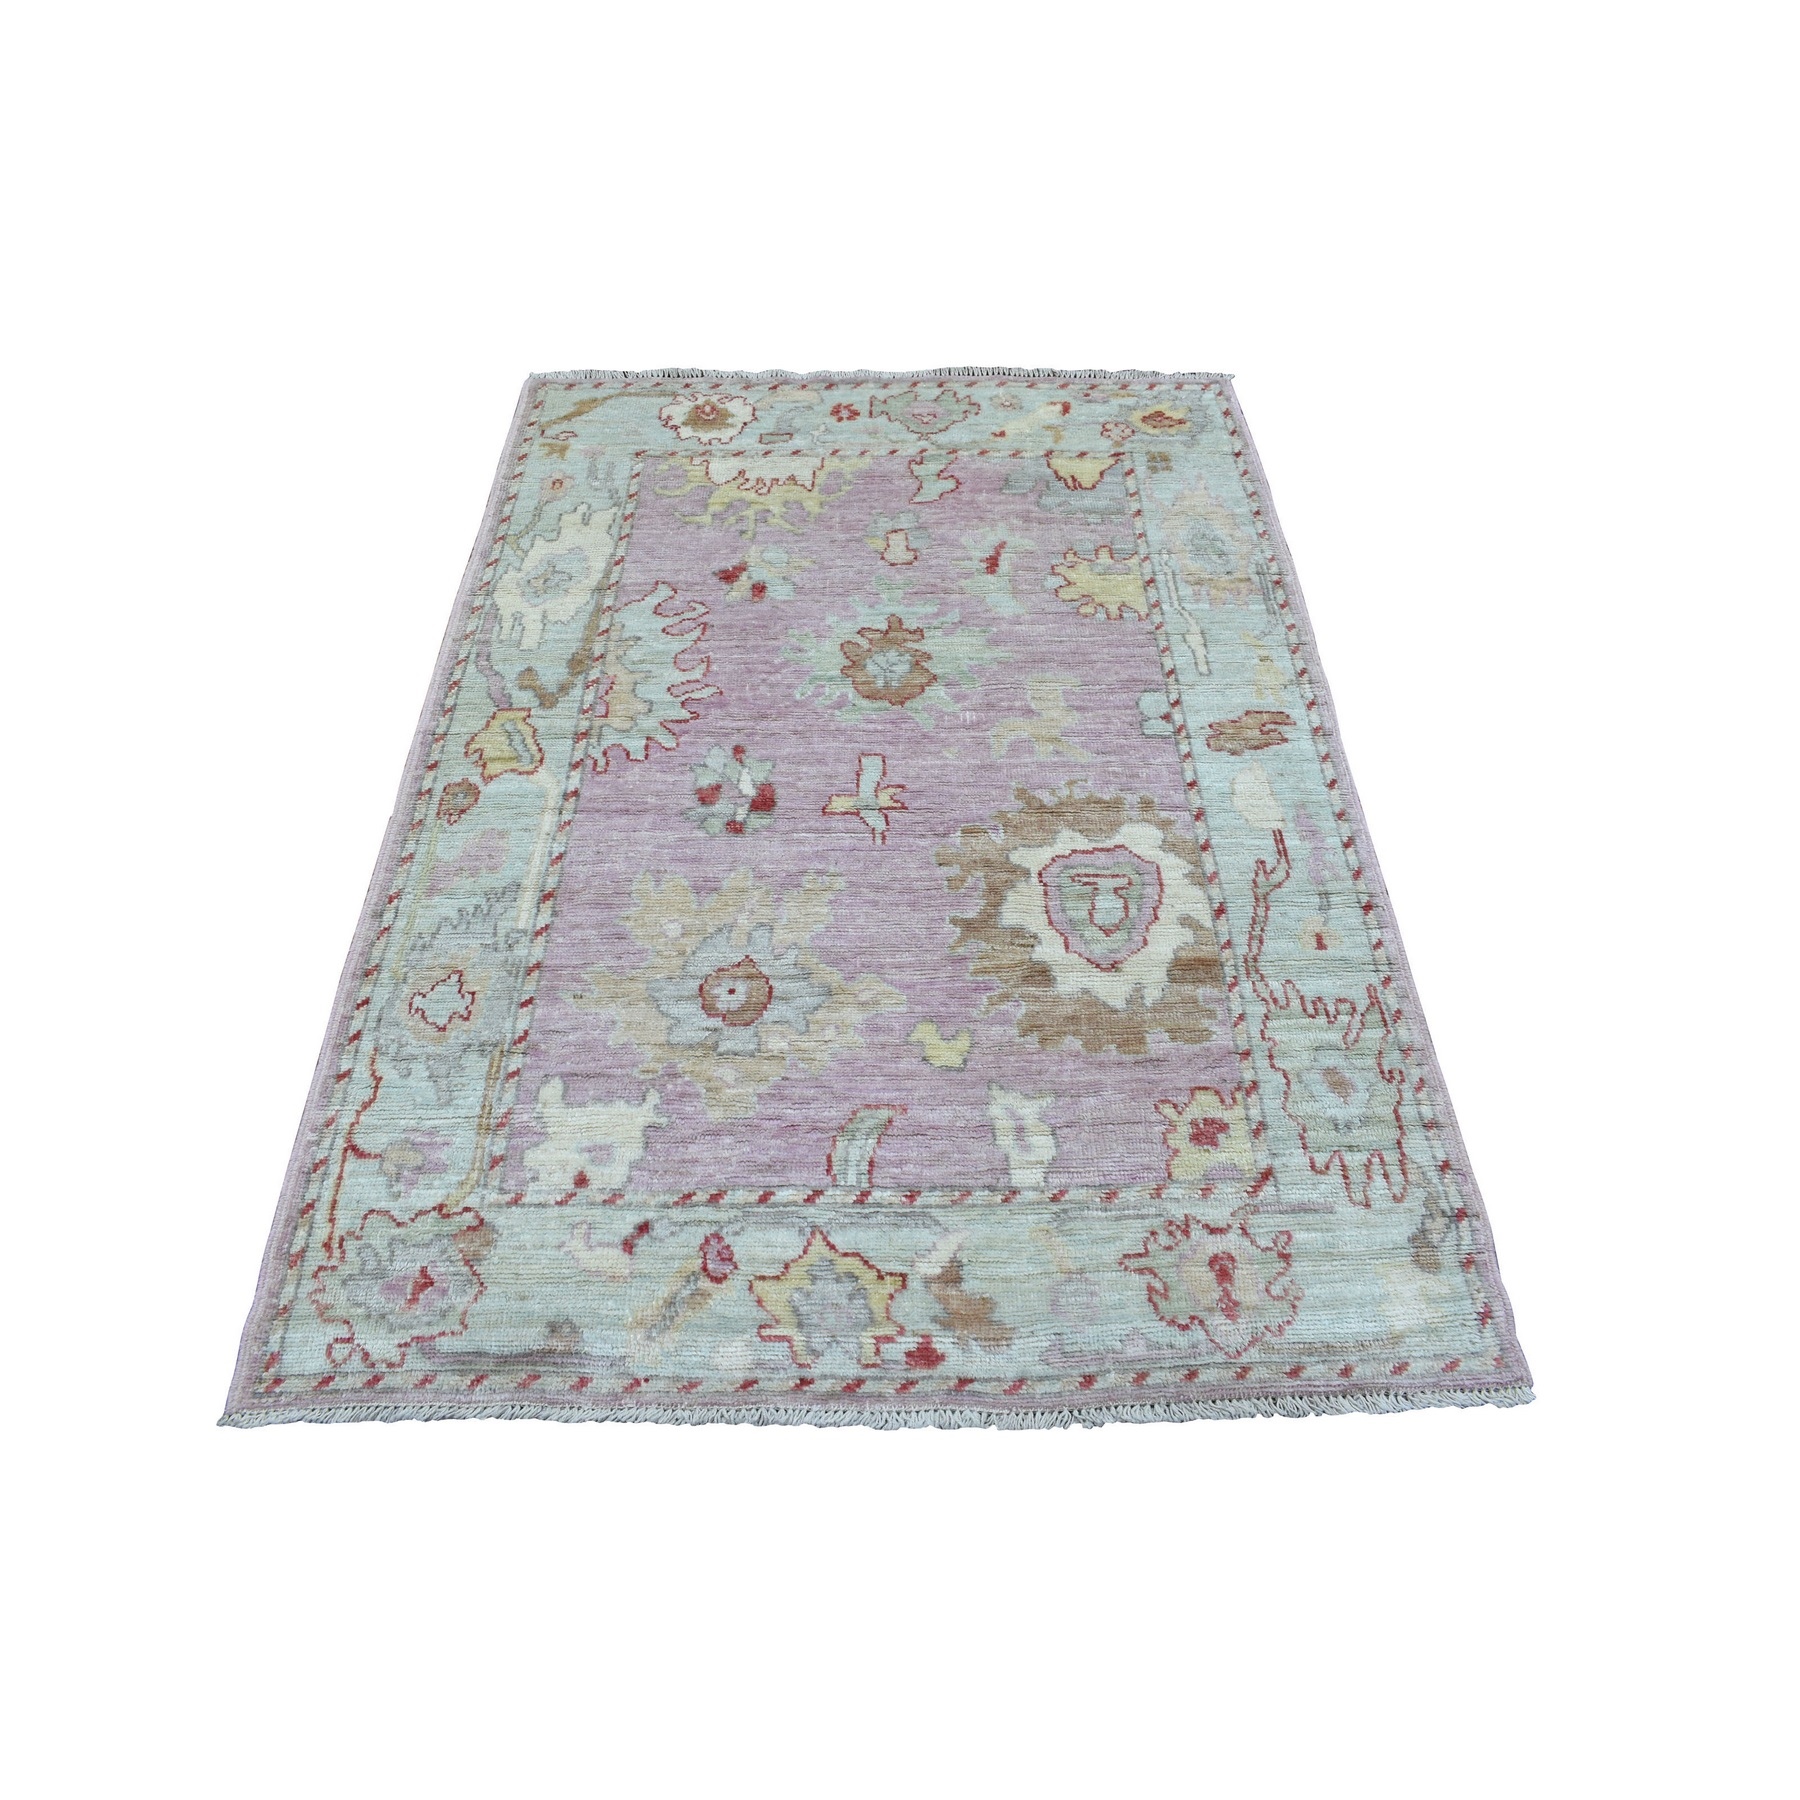 4'1"x5'9" Supple and Pliable Wool Lilac Angora Oushak with Colorful Motifs Hand Woven Oriental Rug 